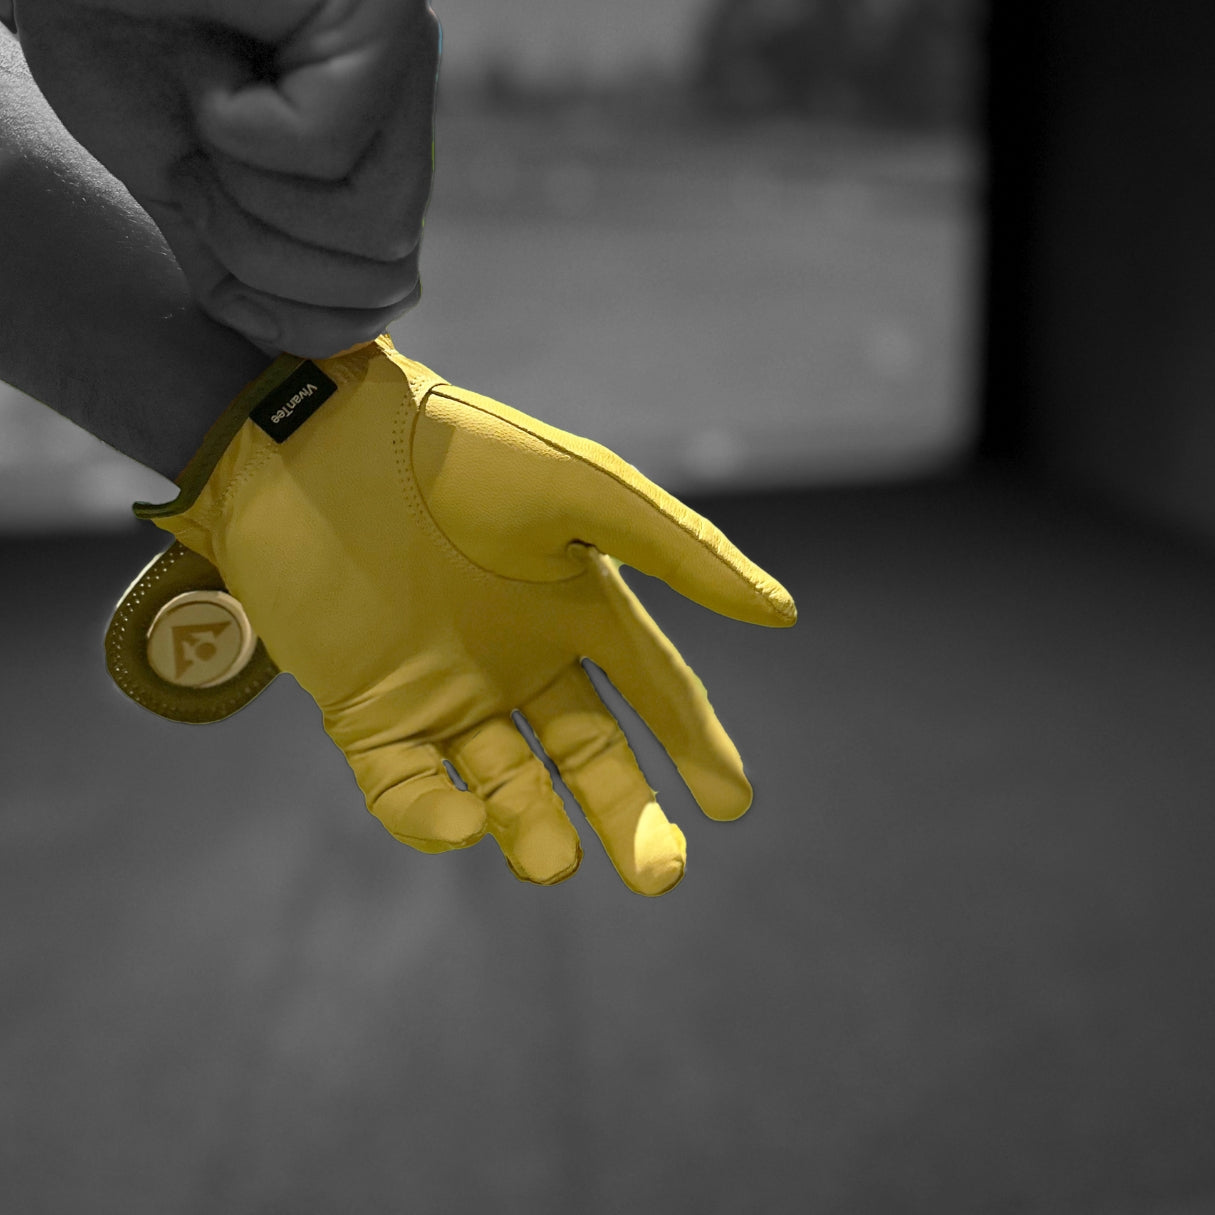 Yellow VivanTee golf glove being donned by a golfer with a golf simulator in the background, in black and white except for the golf glove.